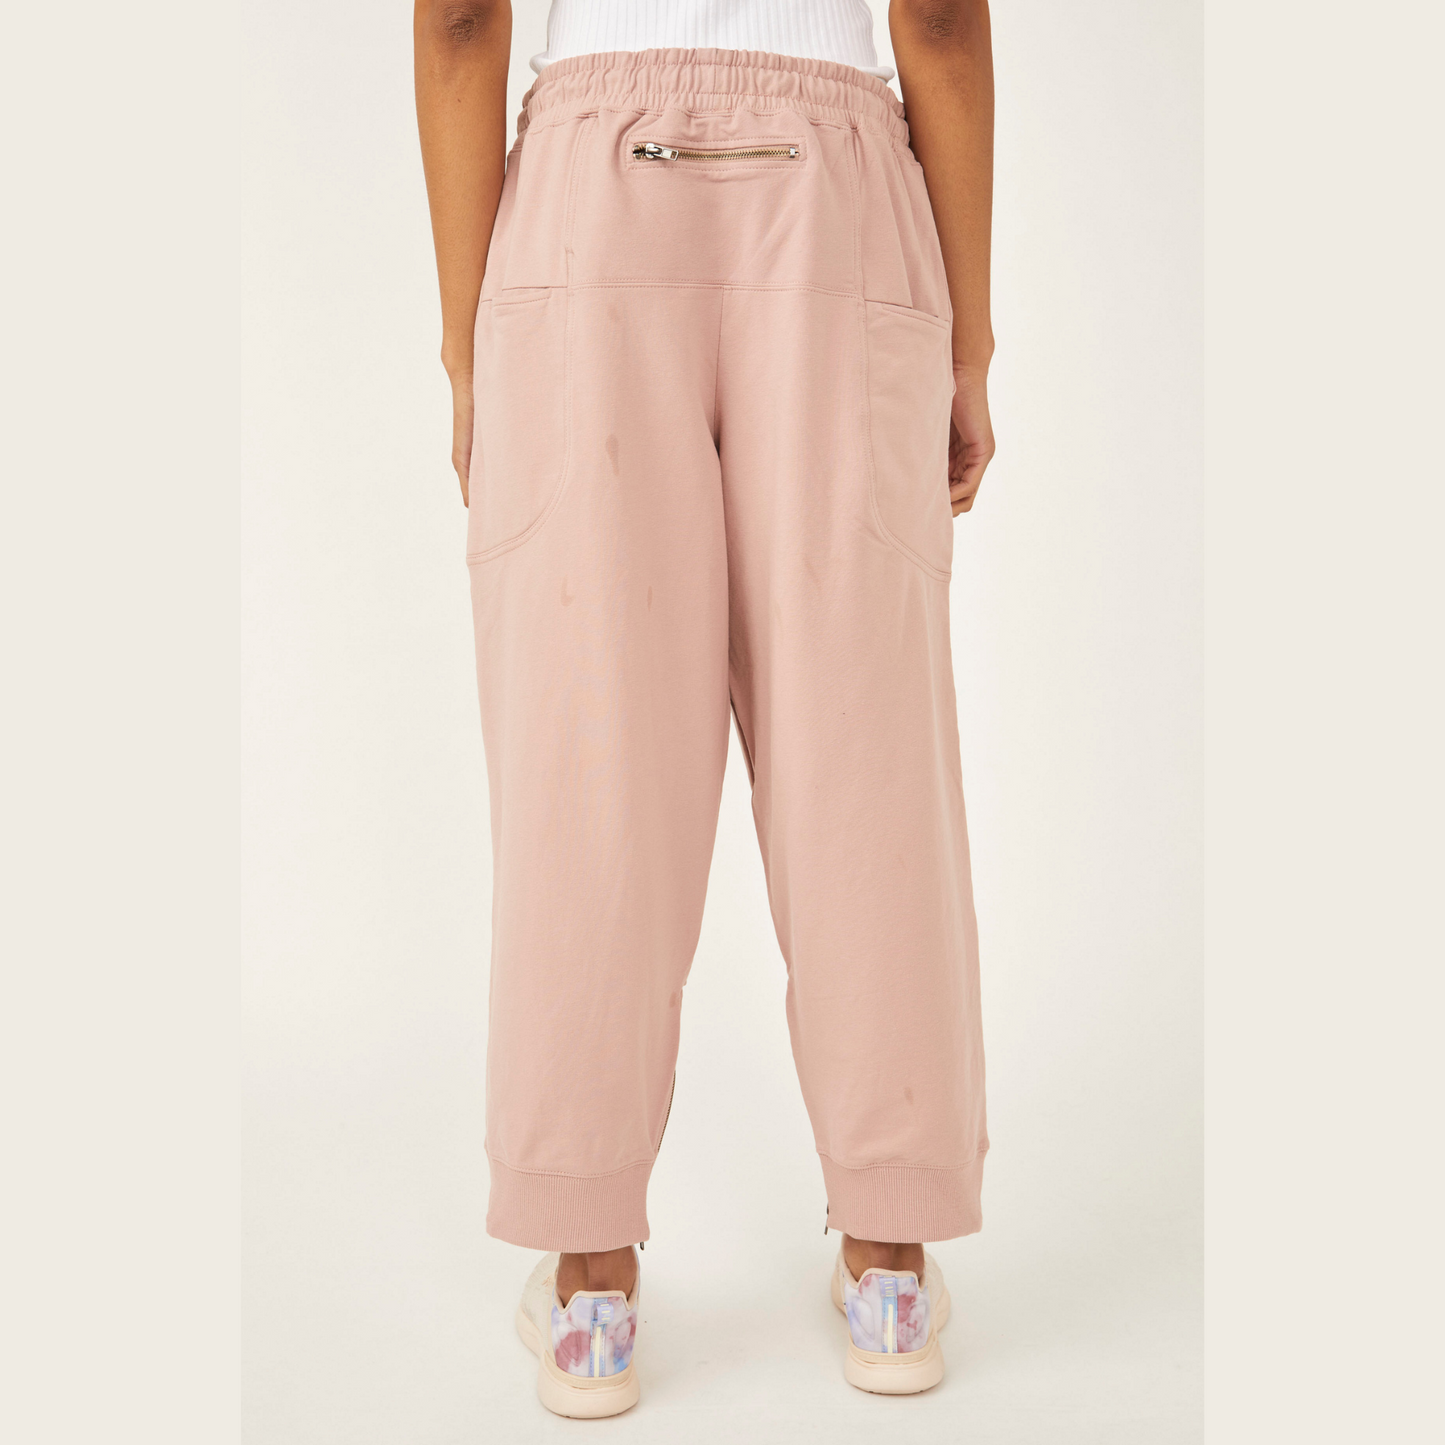 back view of light pink sweat pants with zipper pocked on the top middle